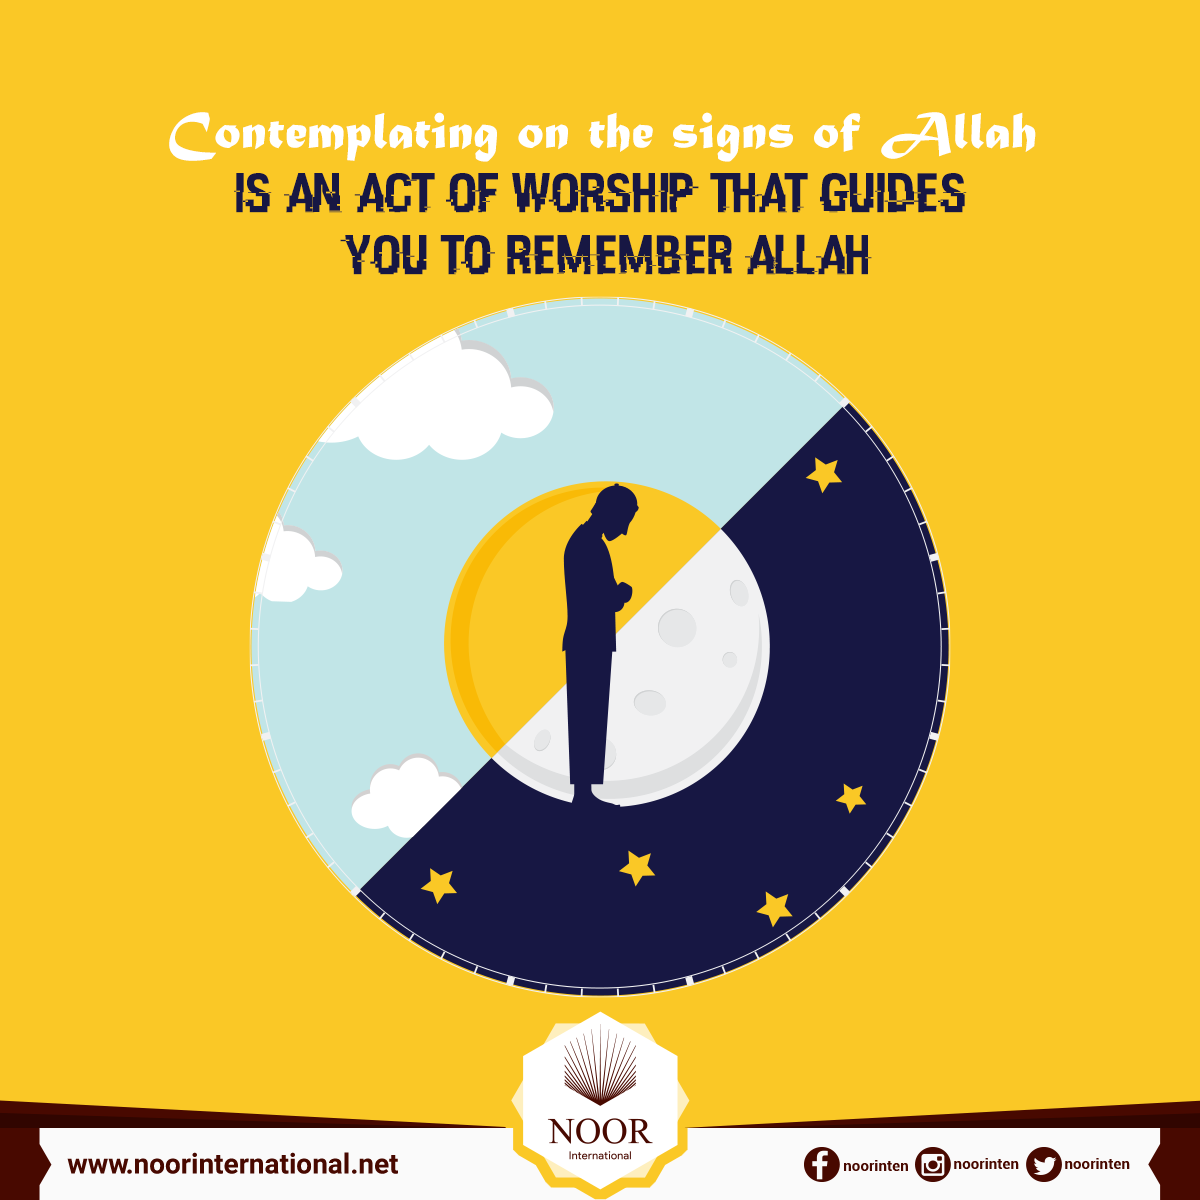 Contemplating on the signs of Allah is an act of worship that guides you to remember Allah